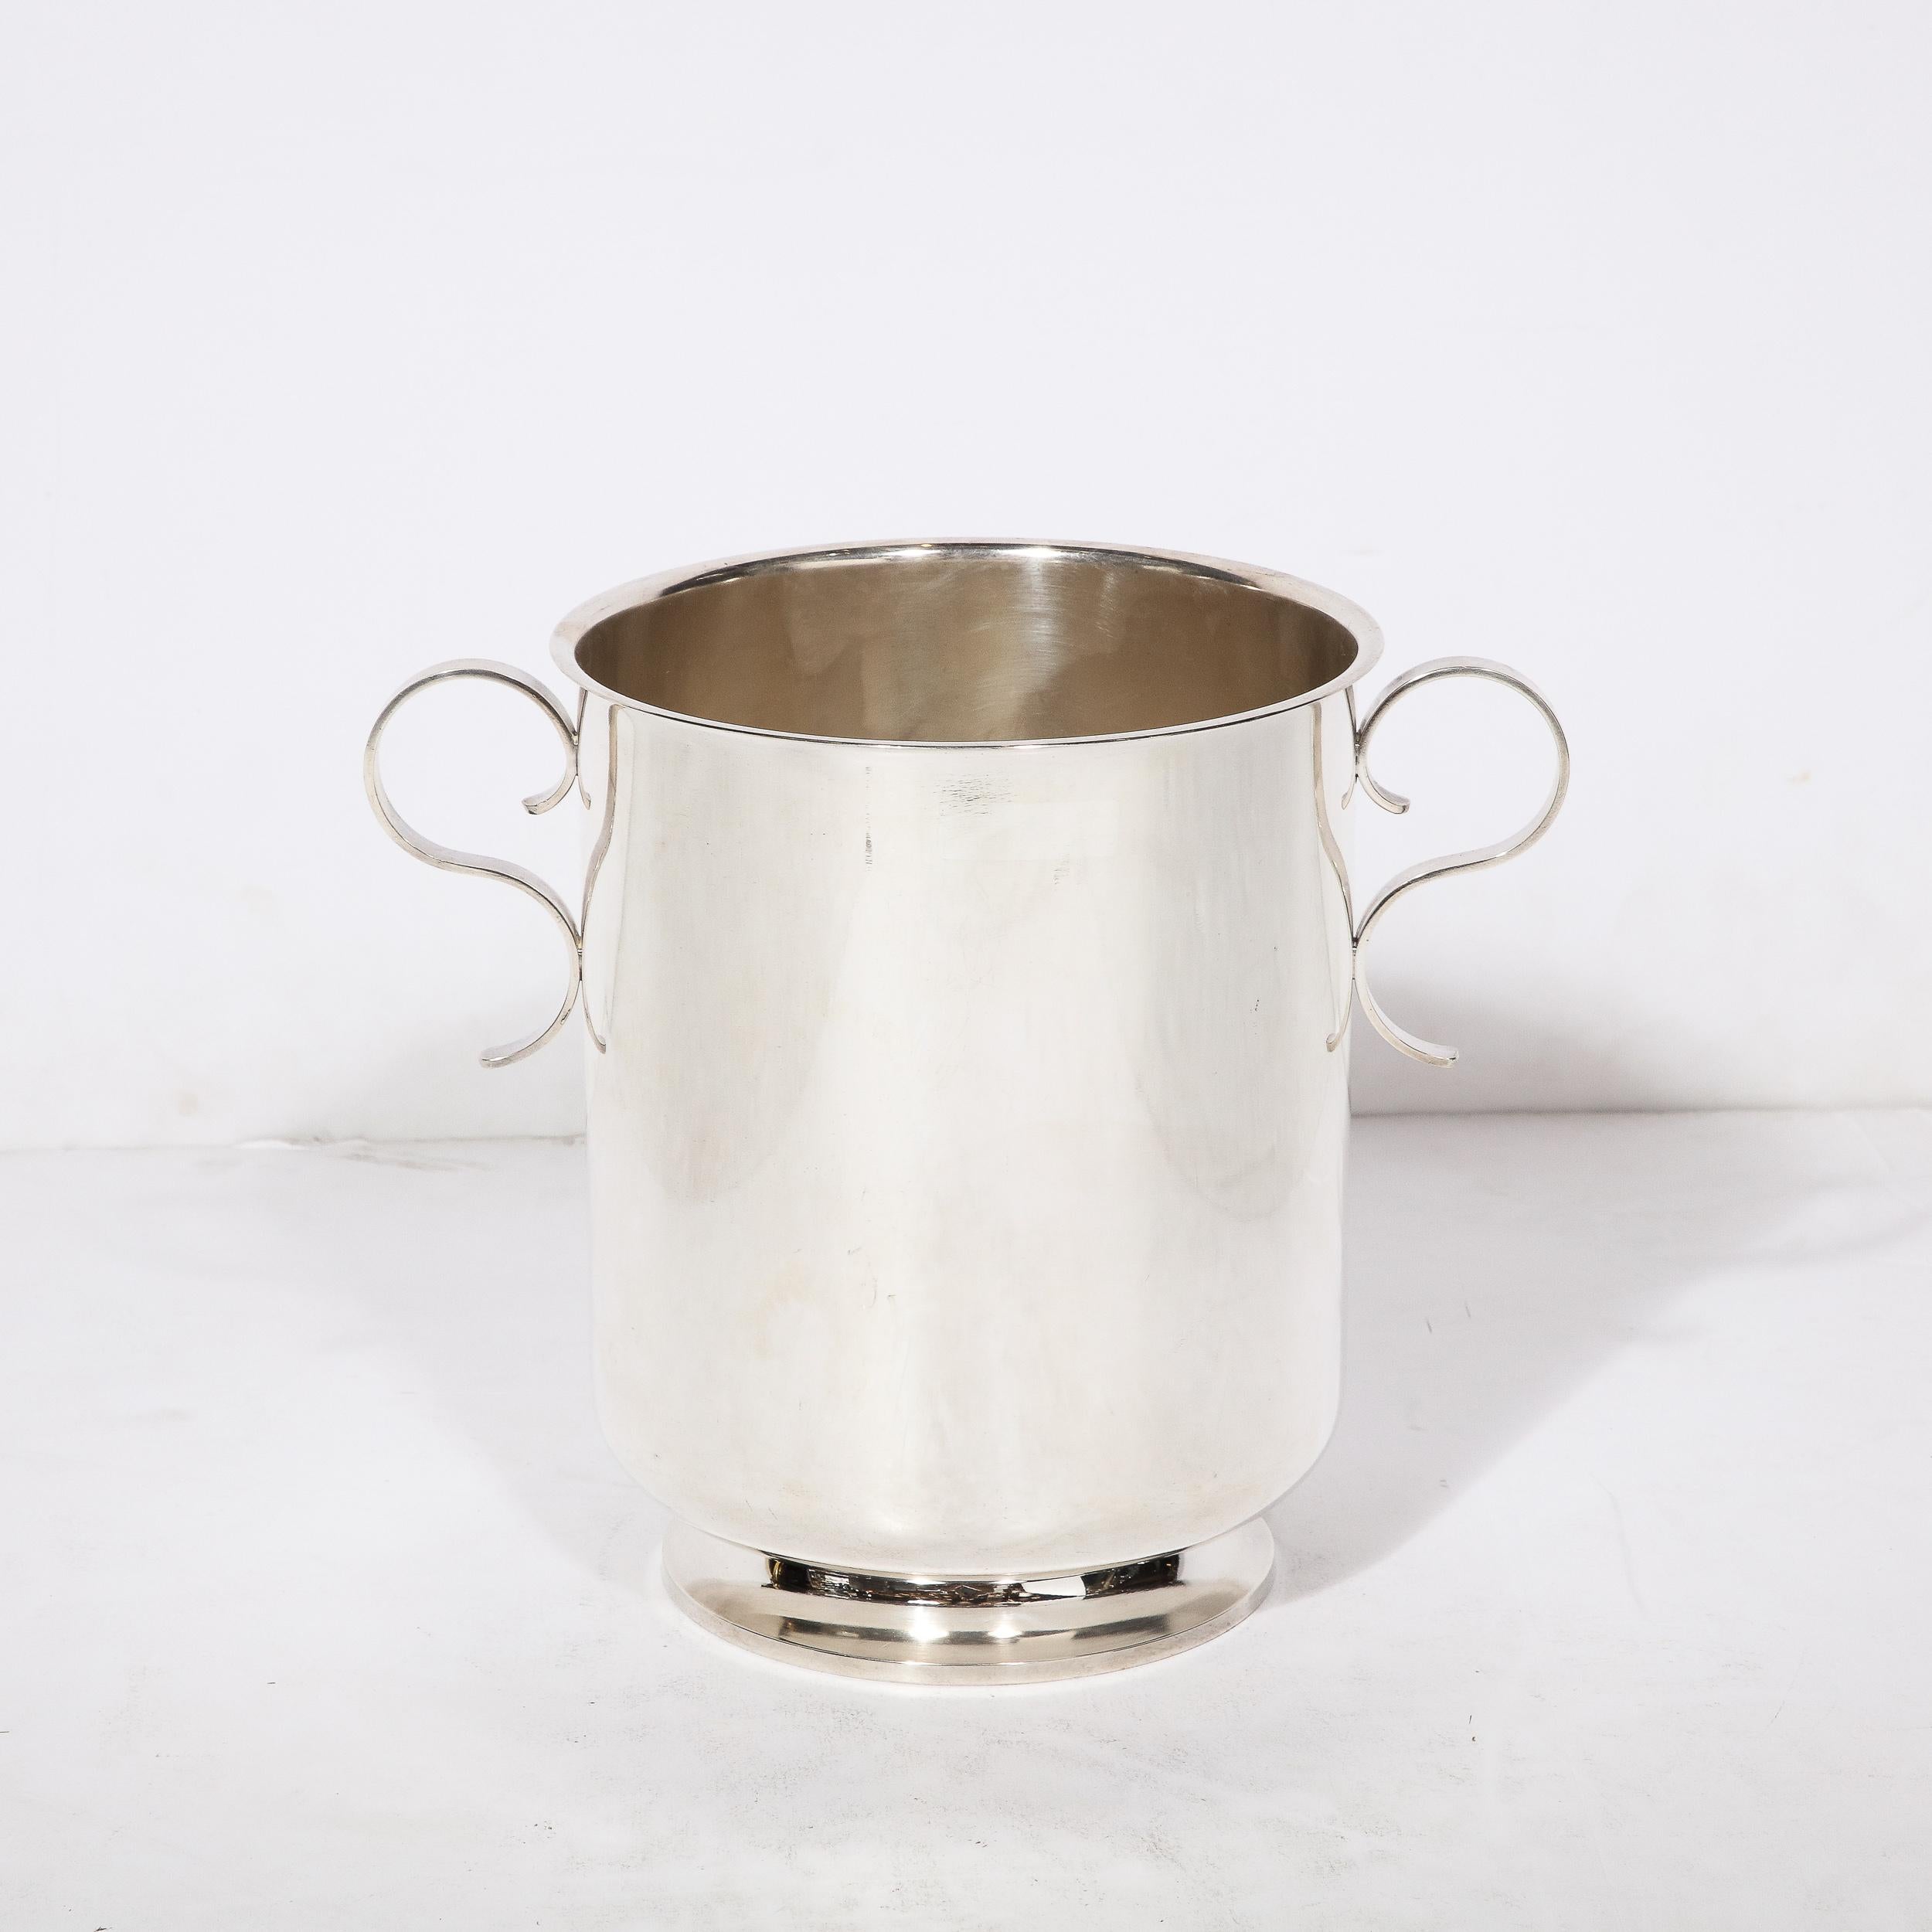 This lovely Mid-Century Modernist Silver plate Ice Bucket originates from France, Circa 1950. Featuring a sleek profile with minimal Scroll form handles on either side, the graceful curvatures create a timeless silhouette and accent with reference